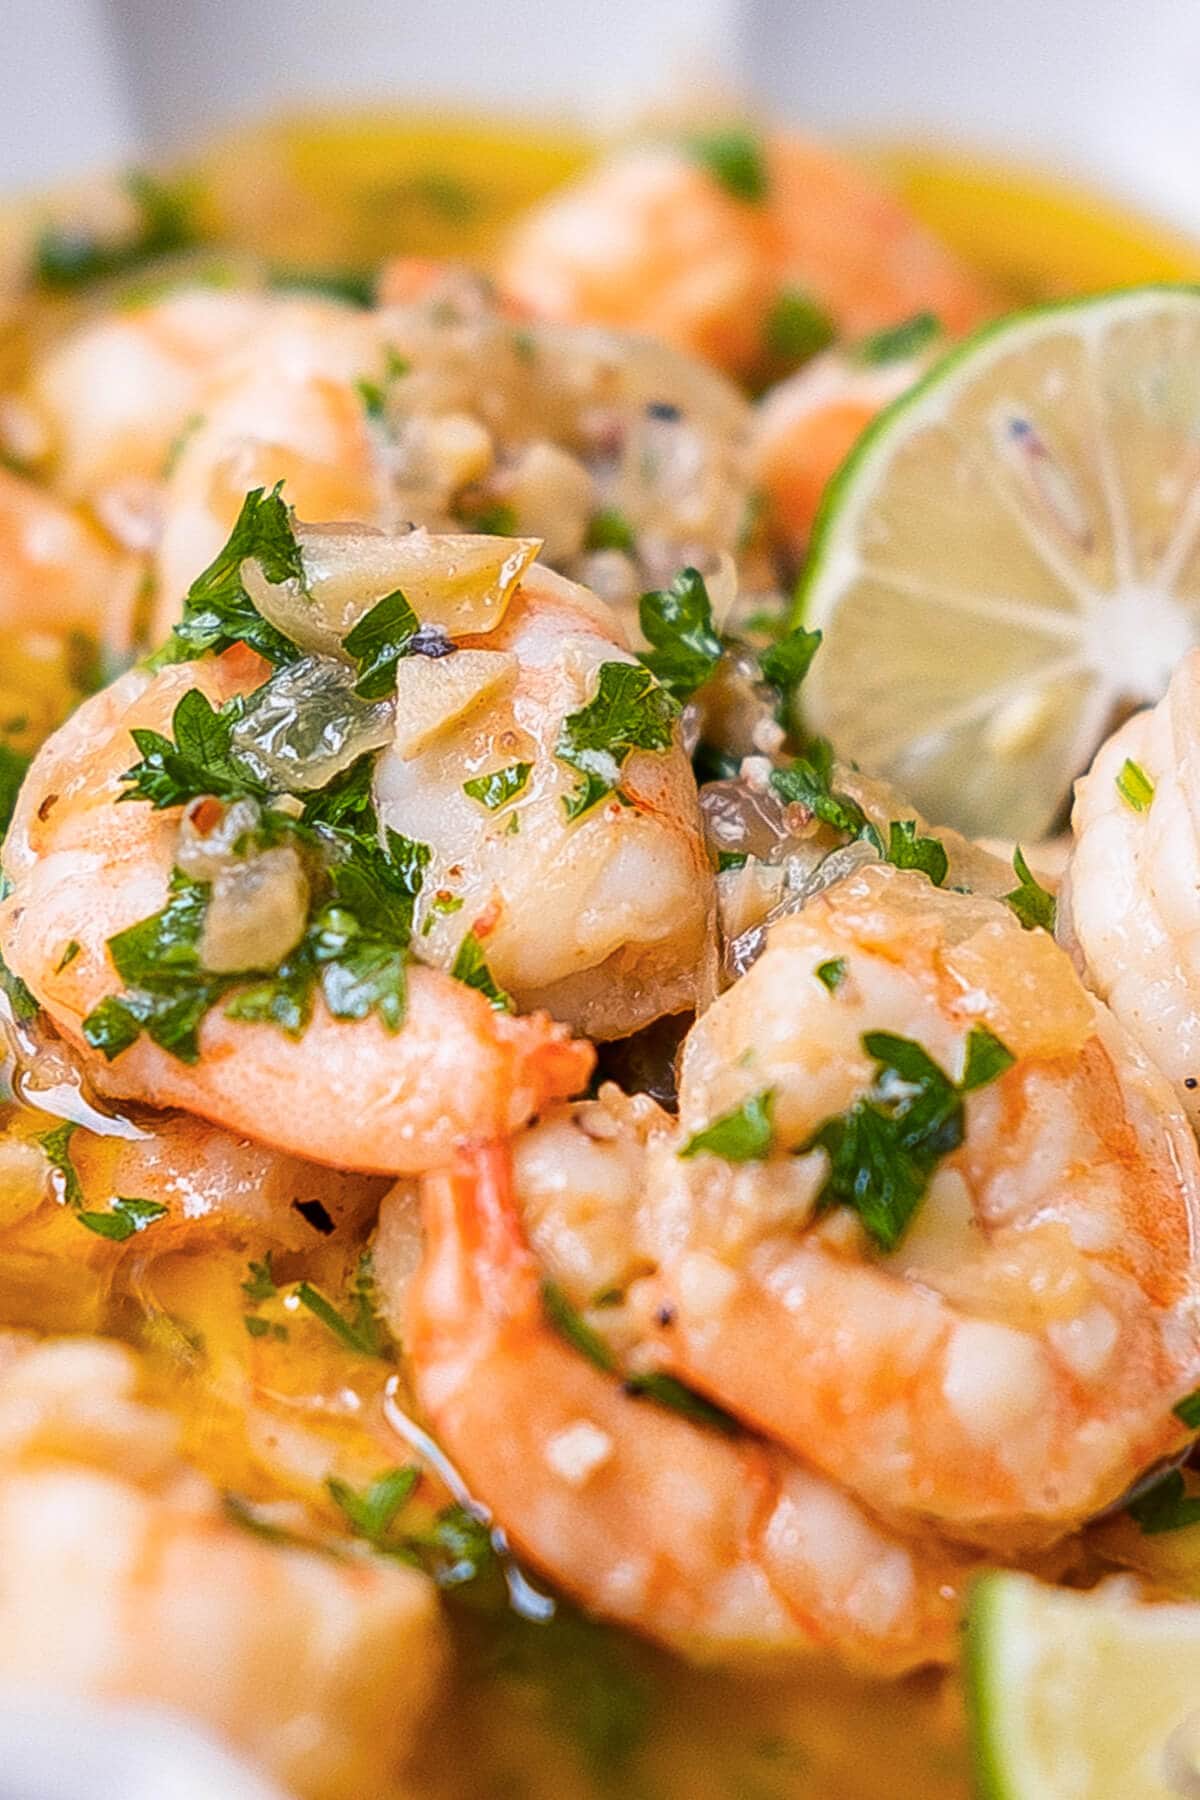 Perfectly cooked shrimps enveloped in a flavorful garlic and white wine sauce.